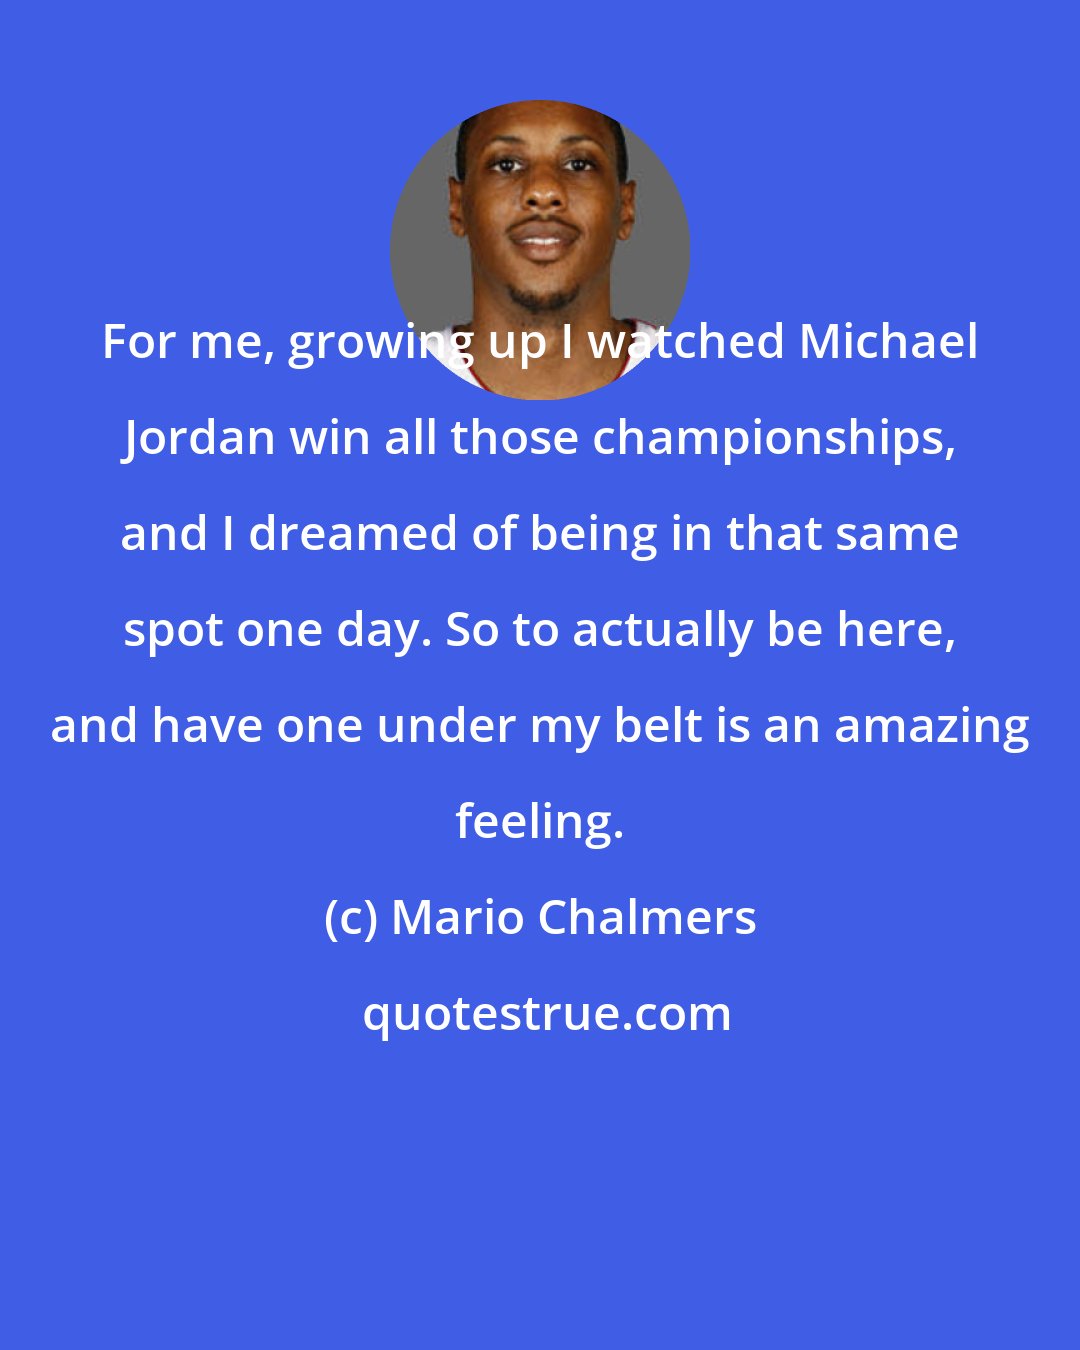 Mario Chalmers: For me, growing up I watched Michael Jordan win all those championships, and I dreamed of being in that same spot one day. So to actually be here, and have one under my belt is an amazing feeling.